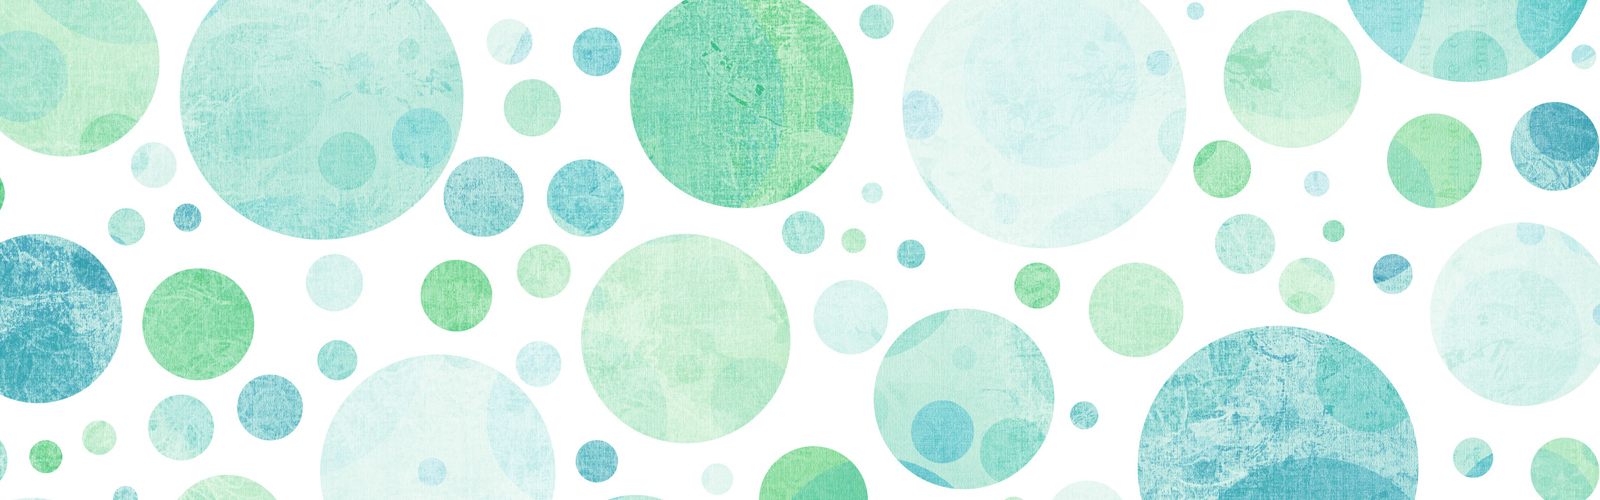 Blue and green bubbles